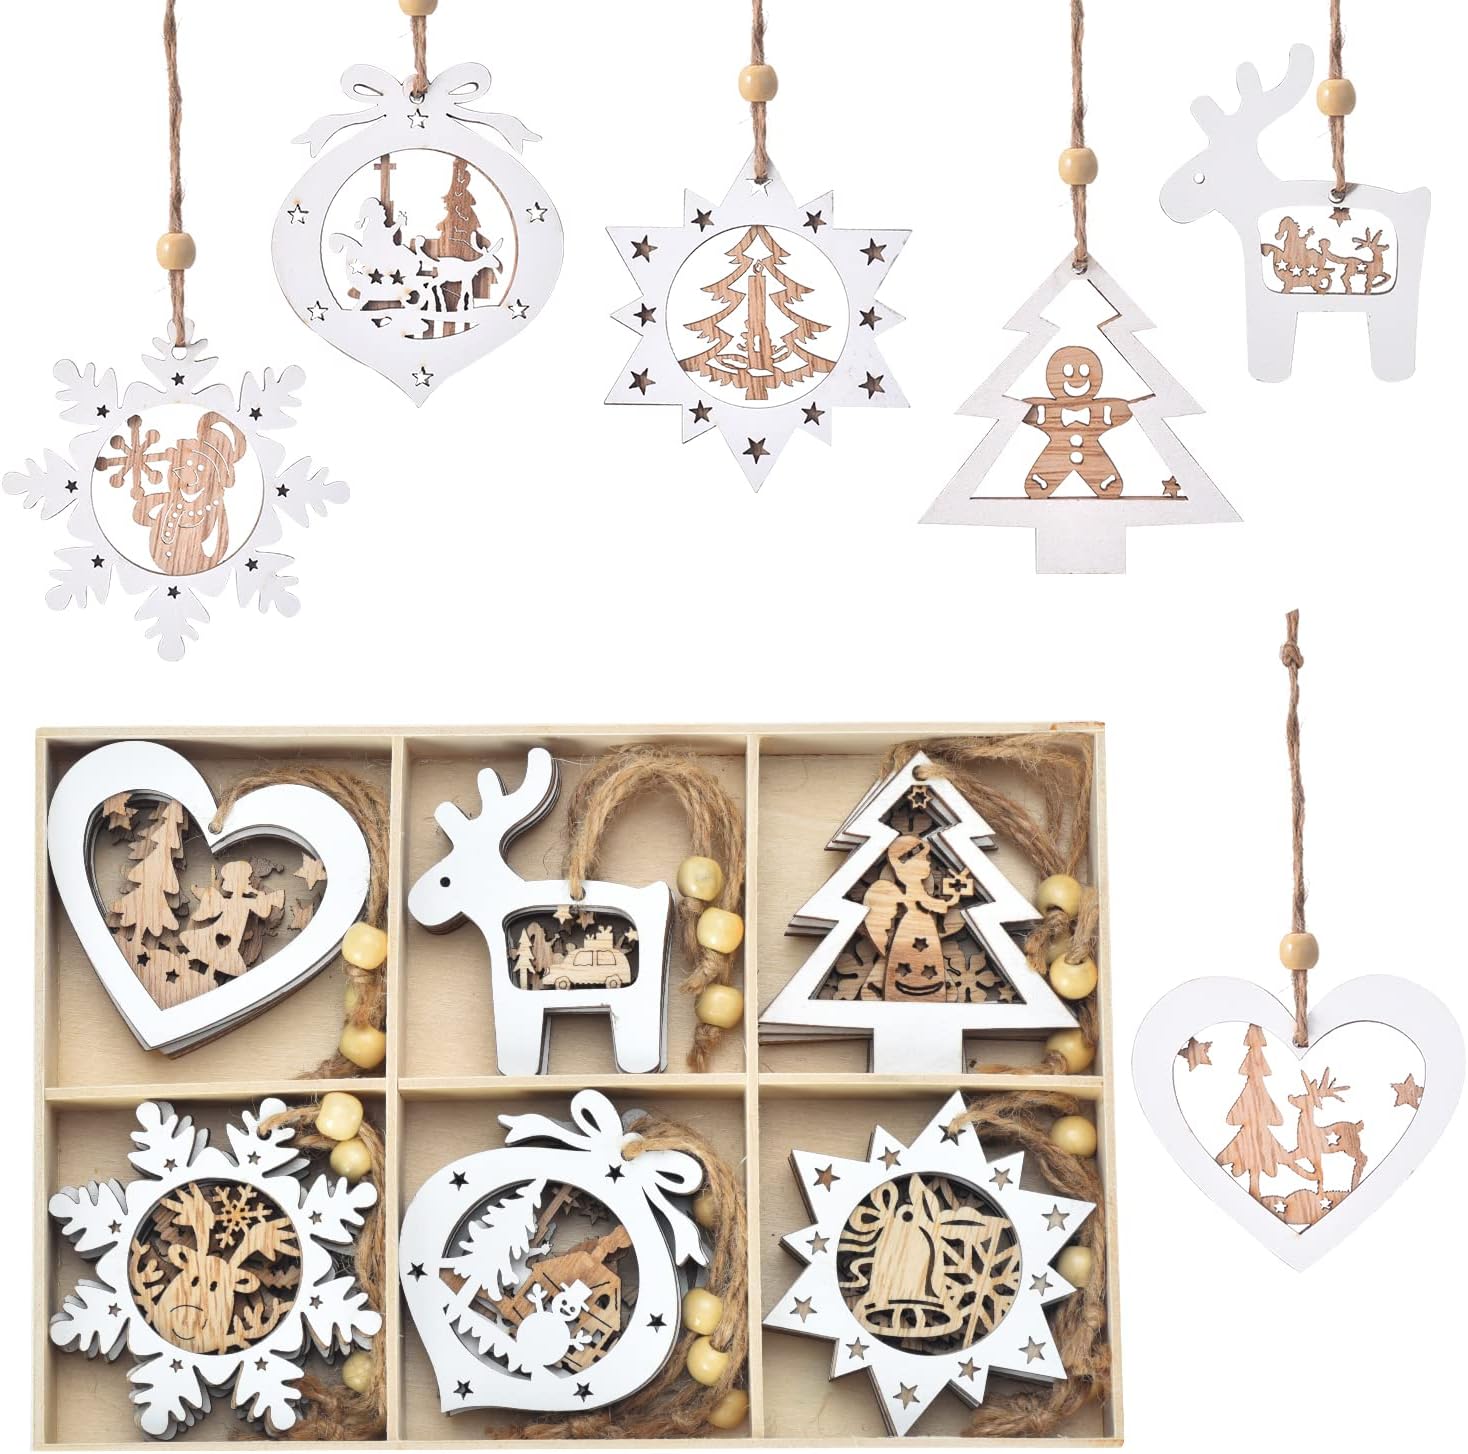 100Pcs Wooden Snowflakes Ornaments,Christmas Tree Hanging Decoration Wood  Cutouts DIY Craft Snowflake Shaped Embellishments Xmas Rustic Crafts With T